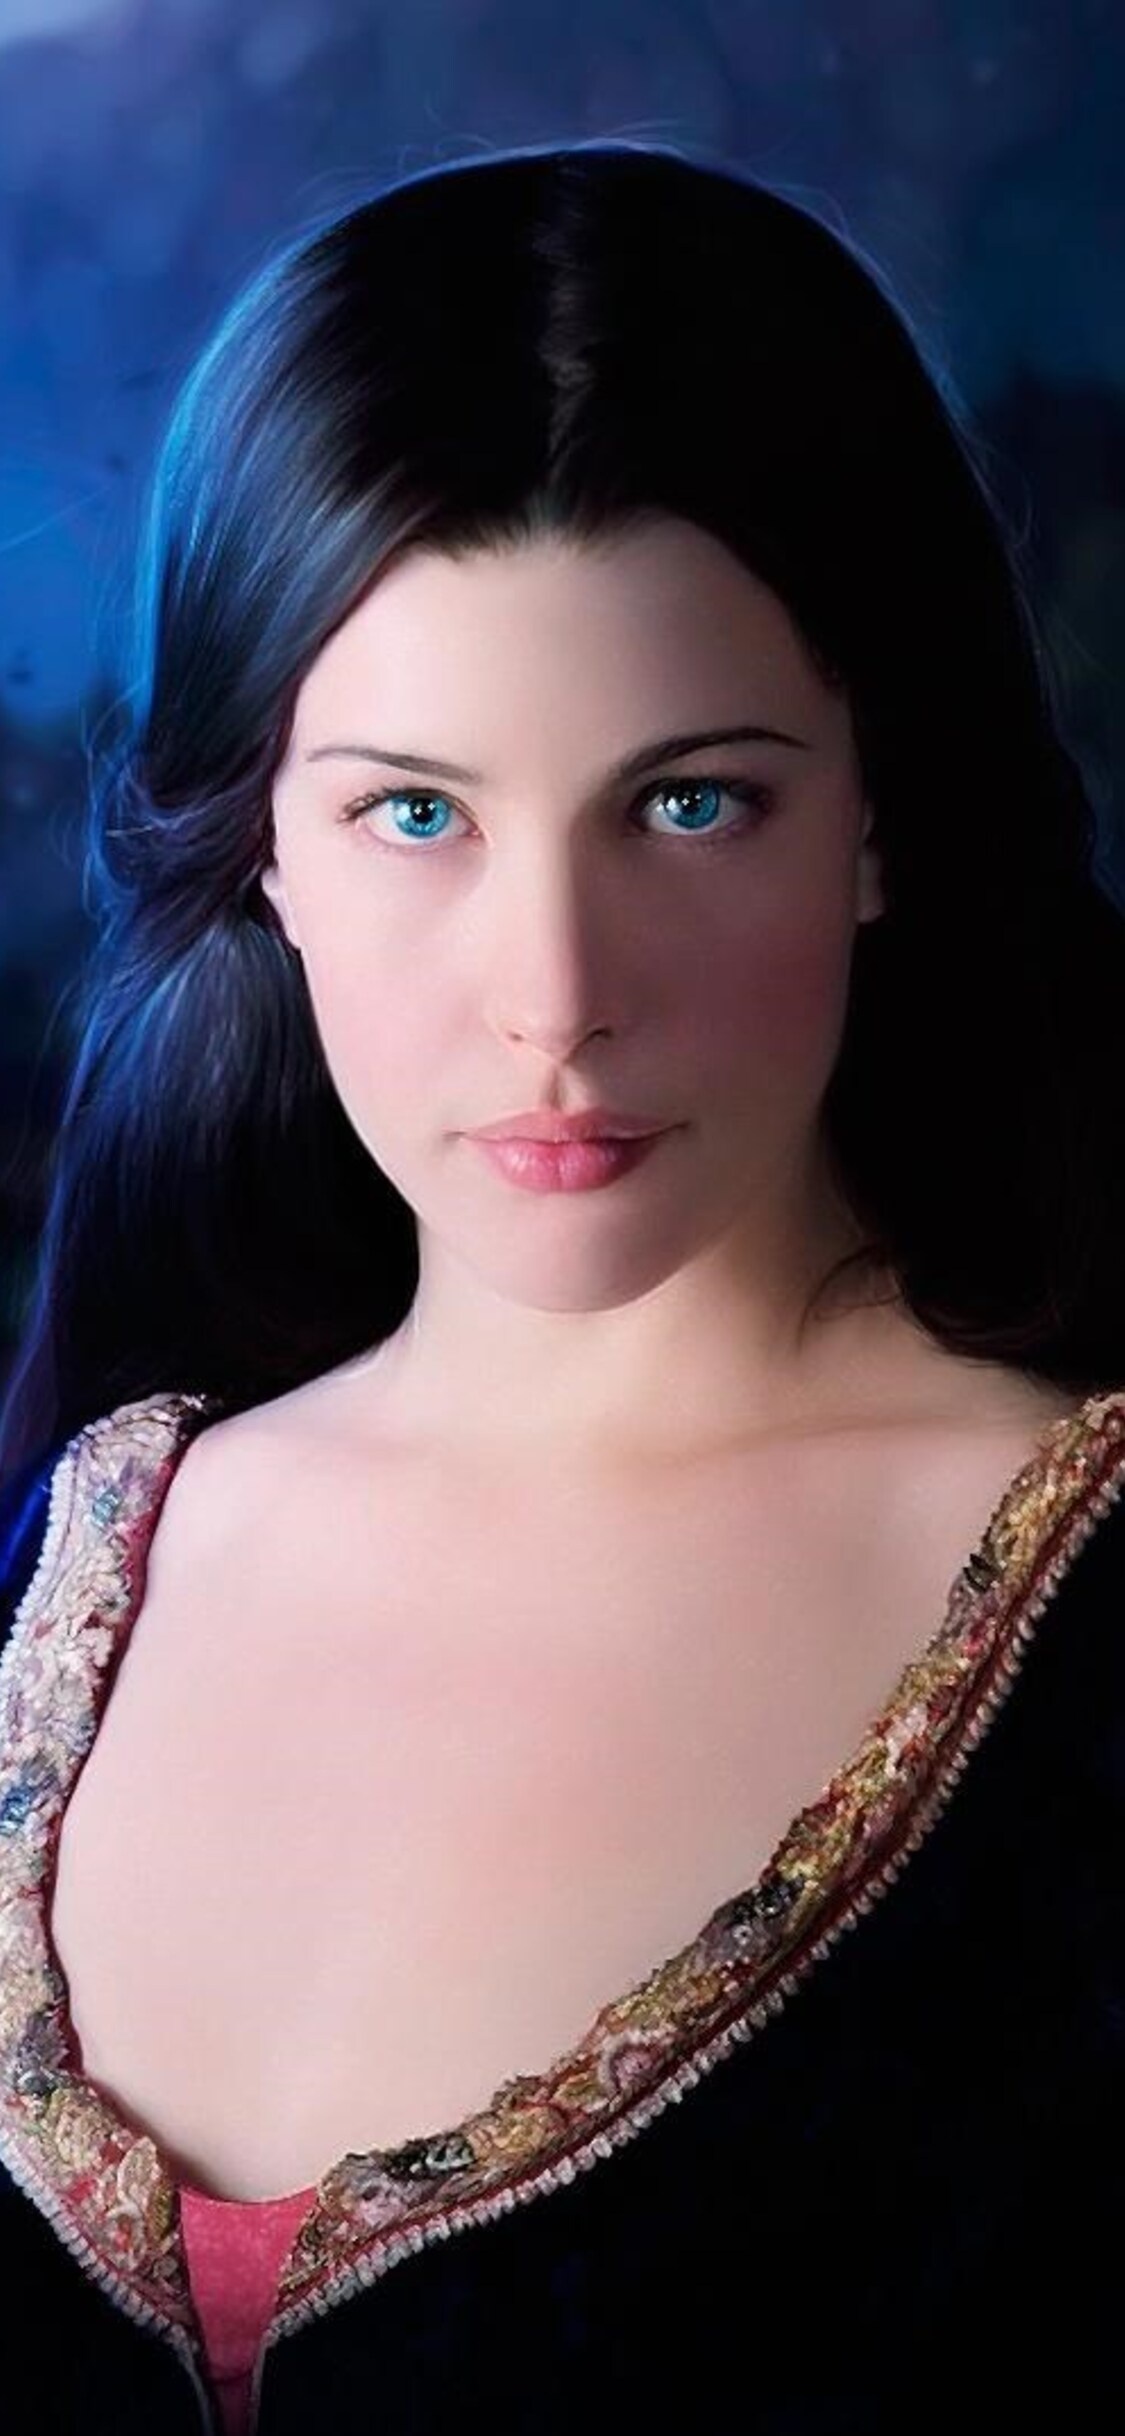 Liv Tyler as Arwen, Lord of the Rings, iPhone wallpaper, Beautiful and graceful, 1130x2440 HD Phone